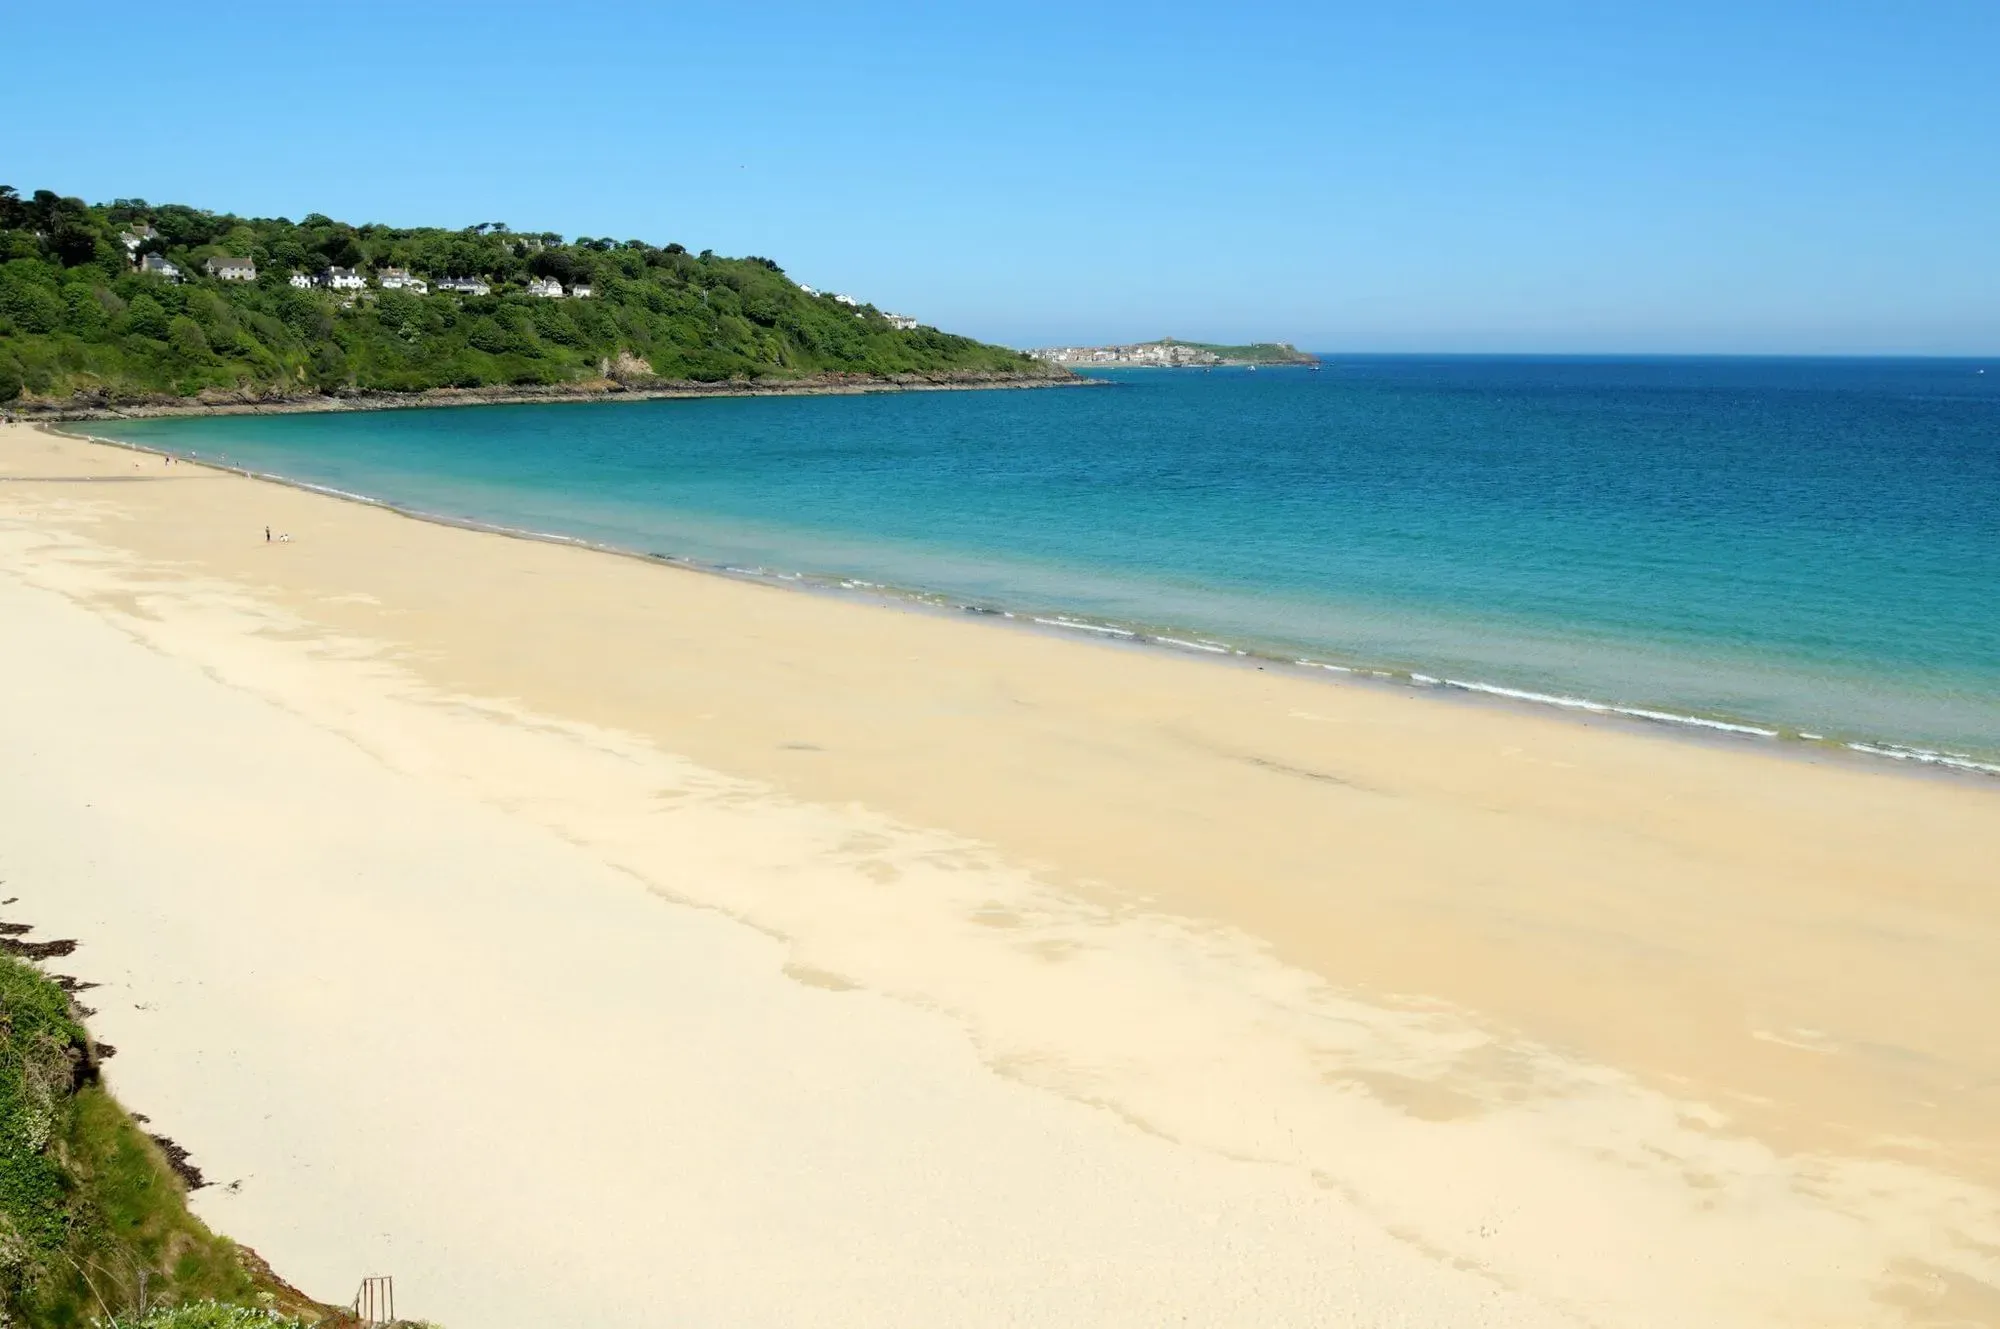 A view of the golden sands at Carbis Bay Beach with blue ocean waves.